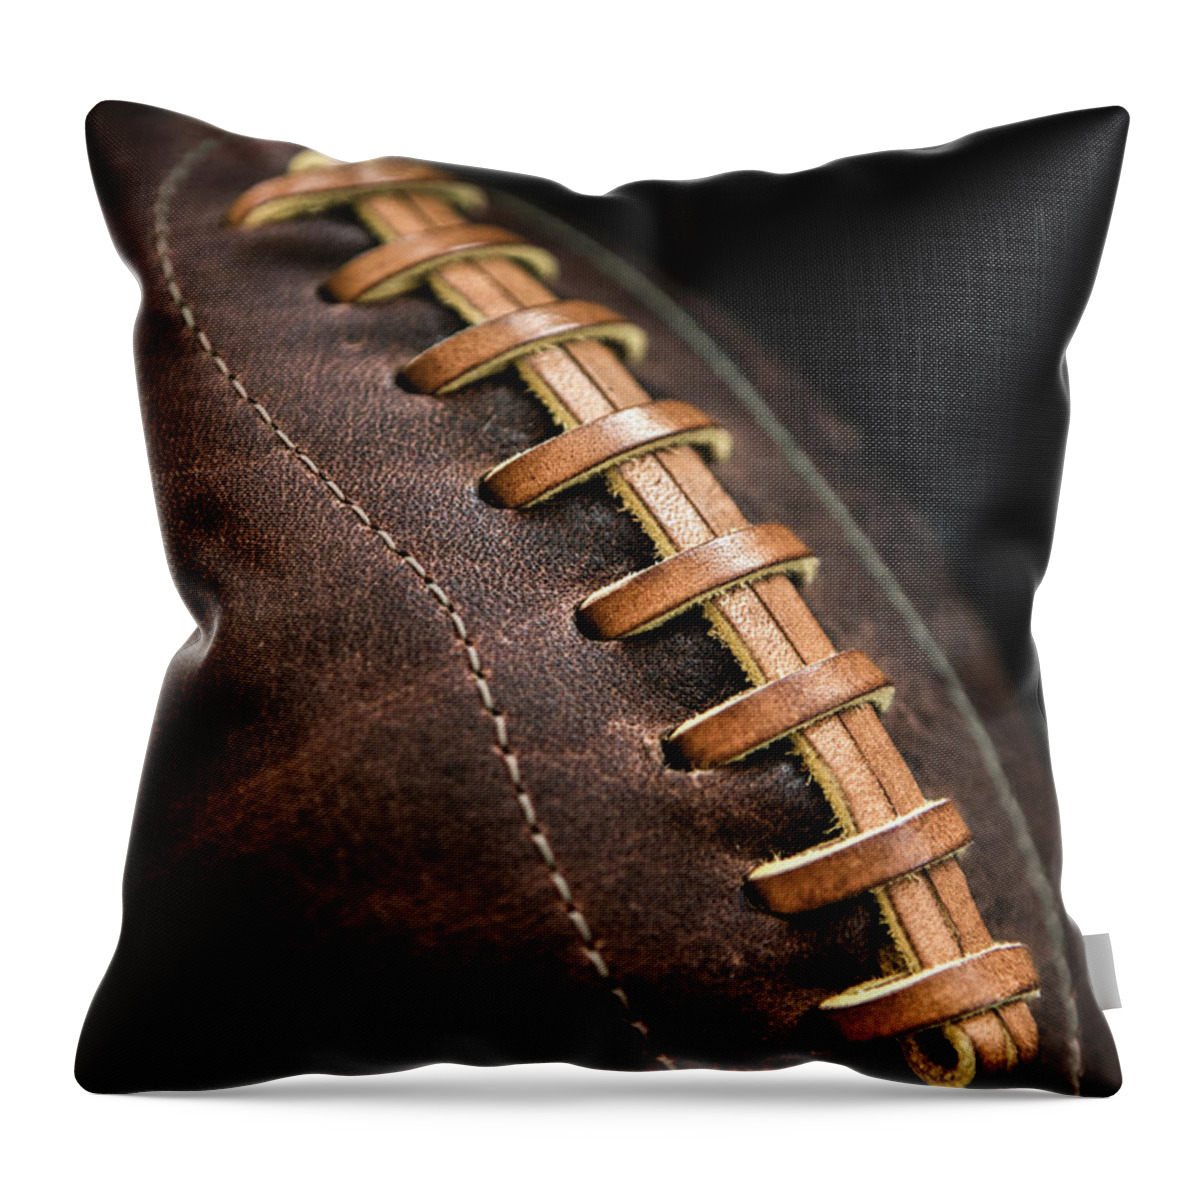 Football Throw Pillow featuring the photograph Vintage Football by Diane Diederich